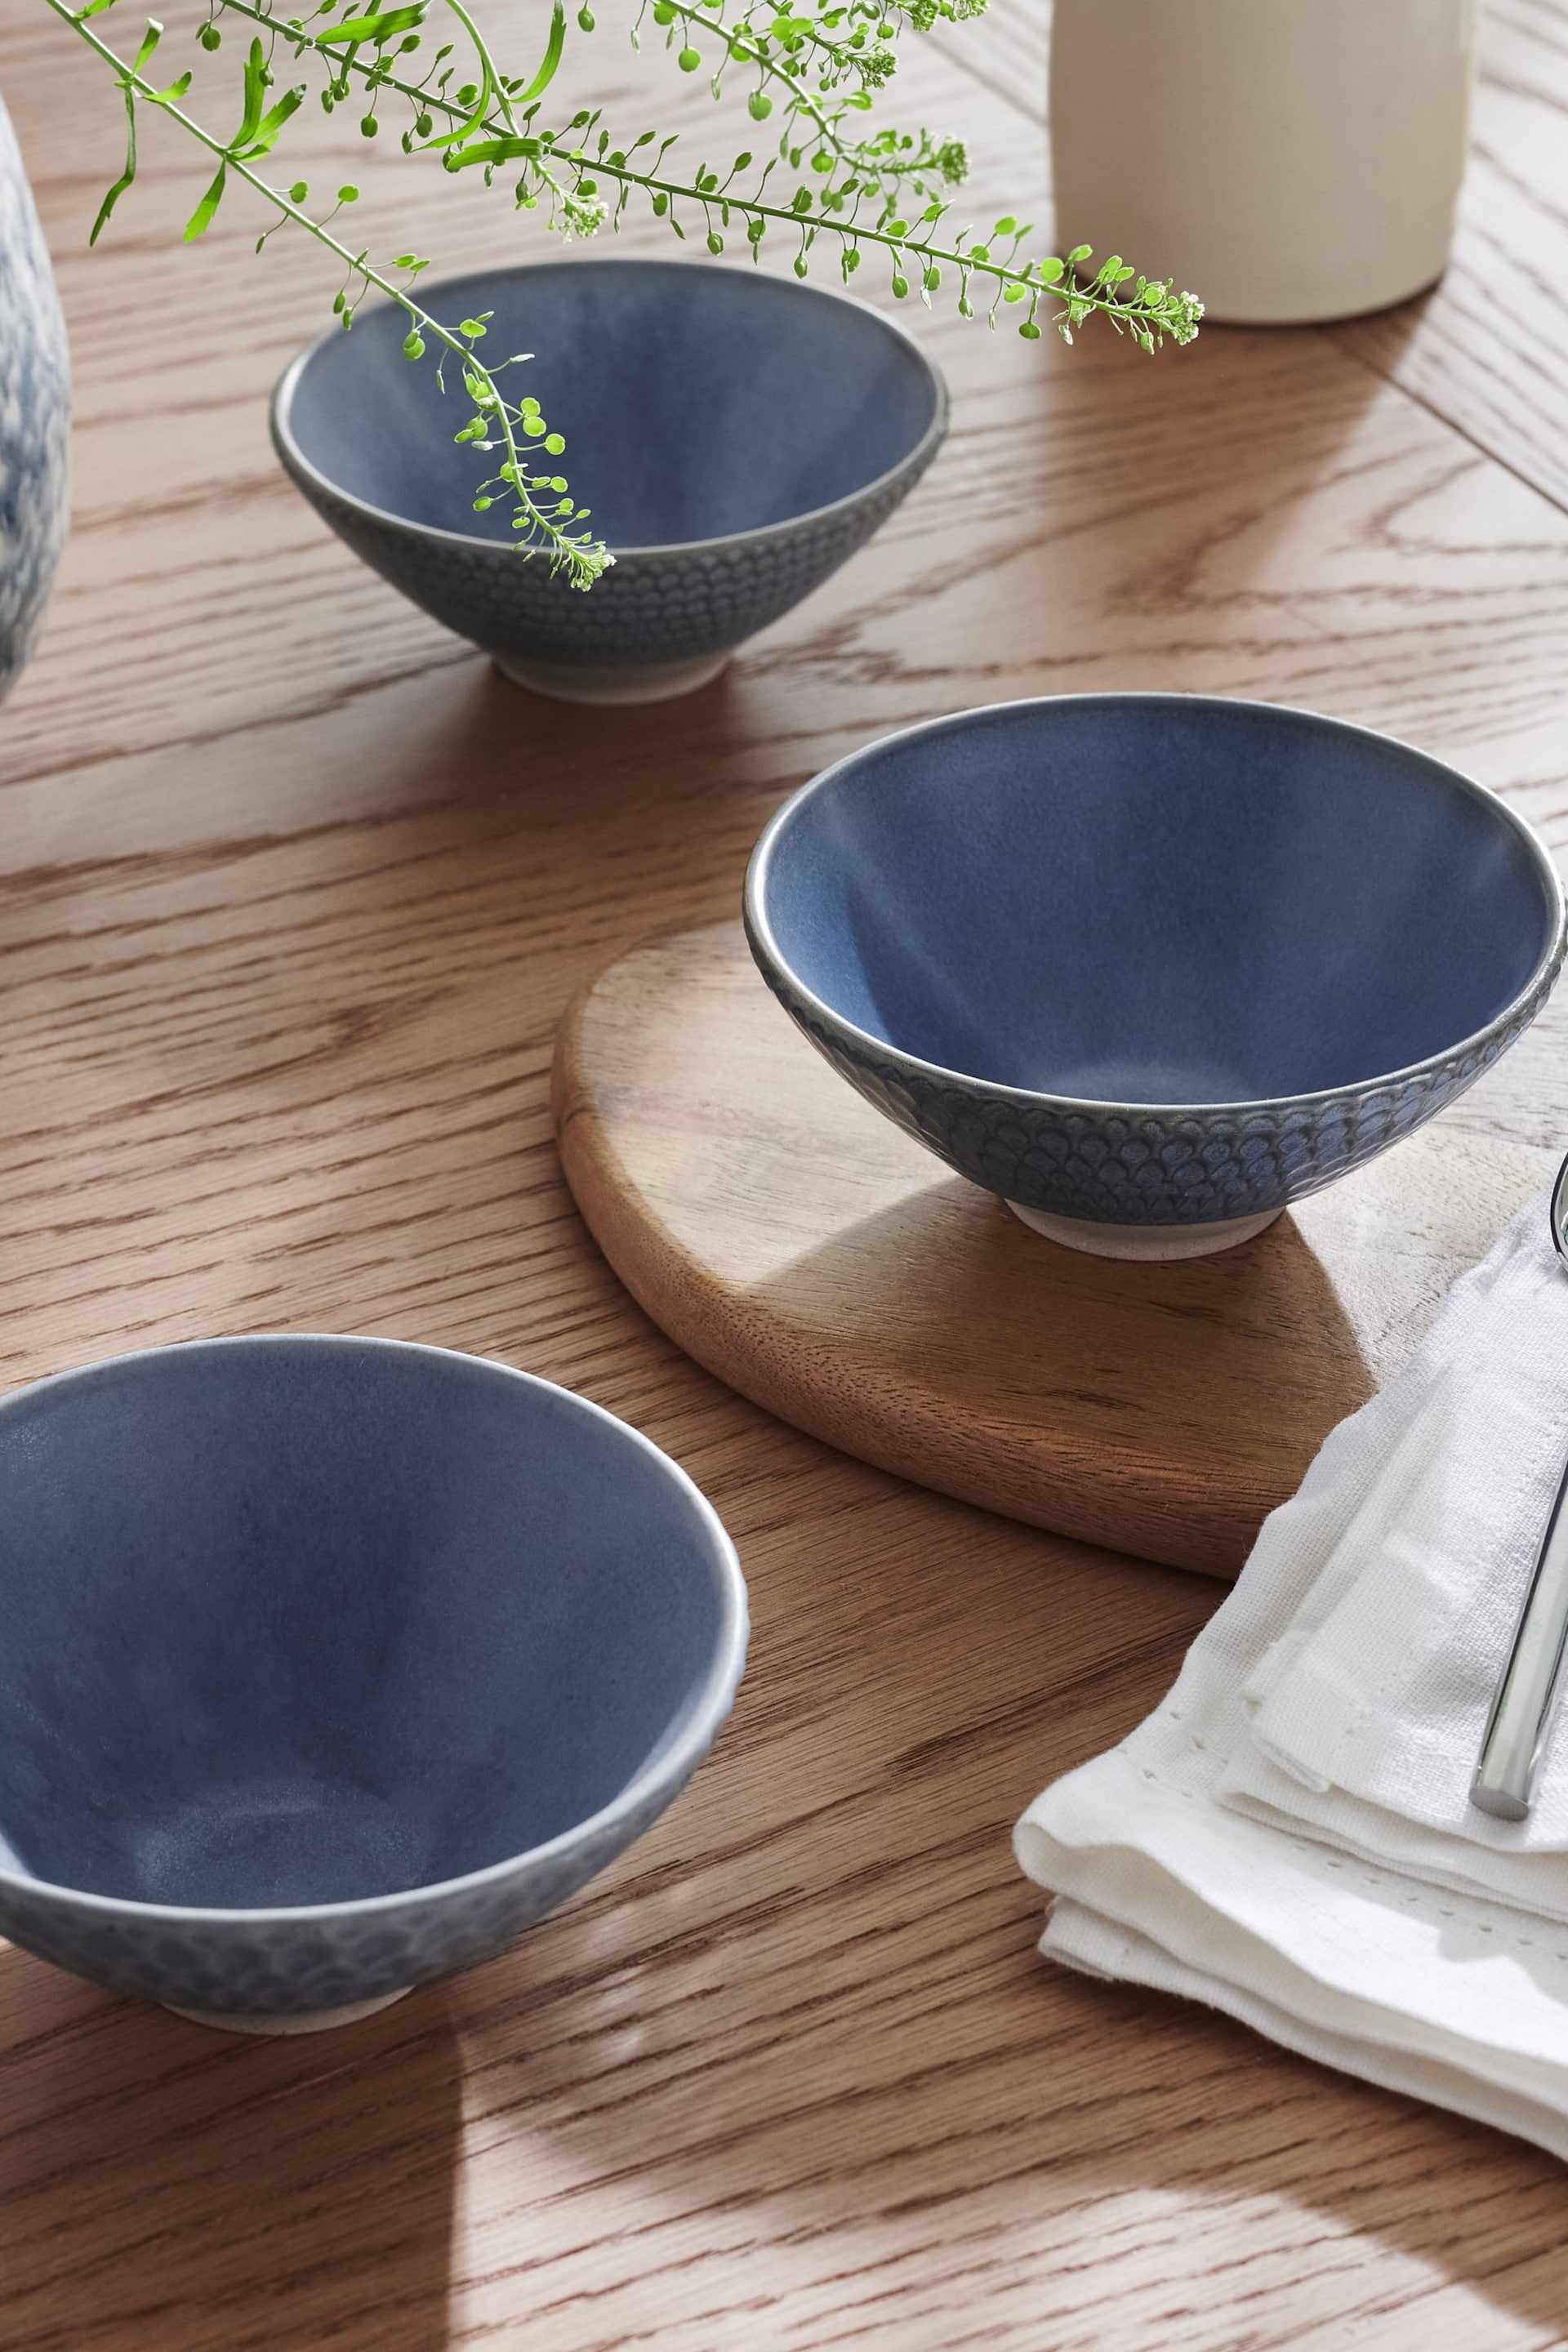 Set of 3 Blue Reactive Glaze Nibble and Dip Bowls - Image 1 of 6